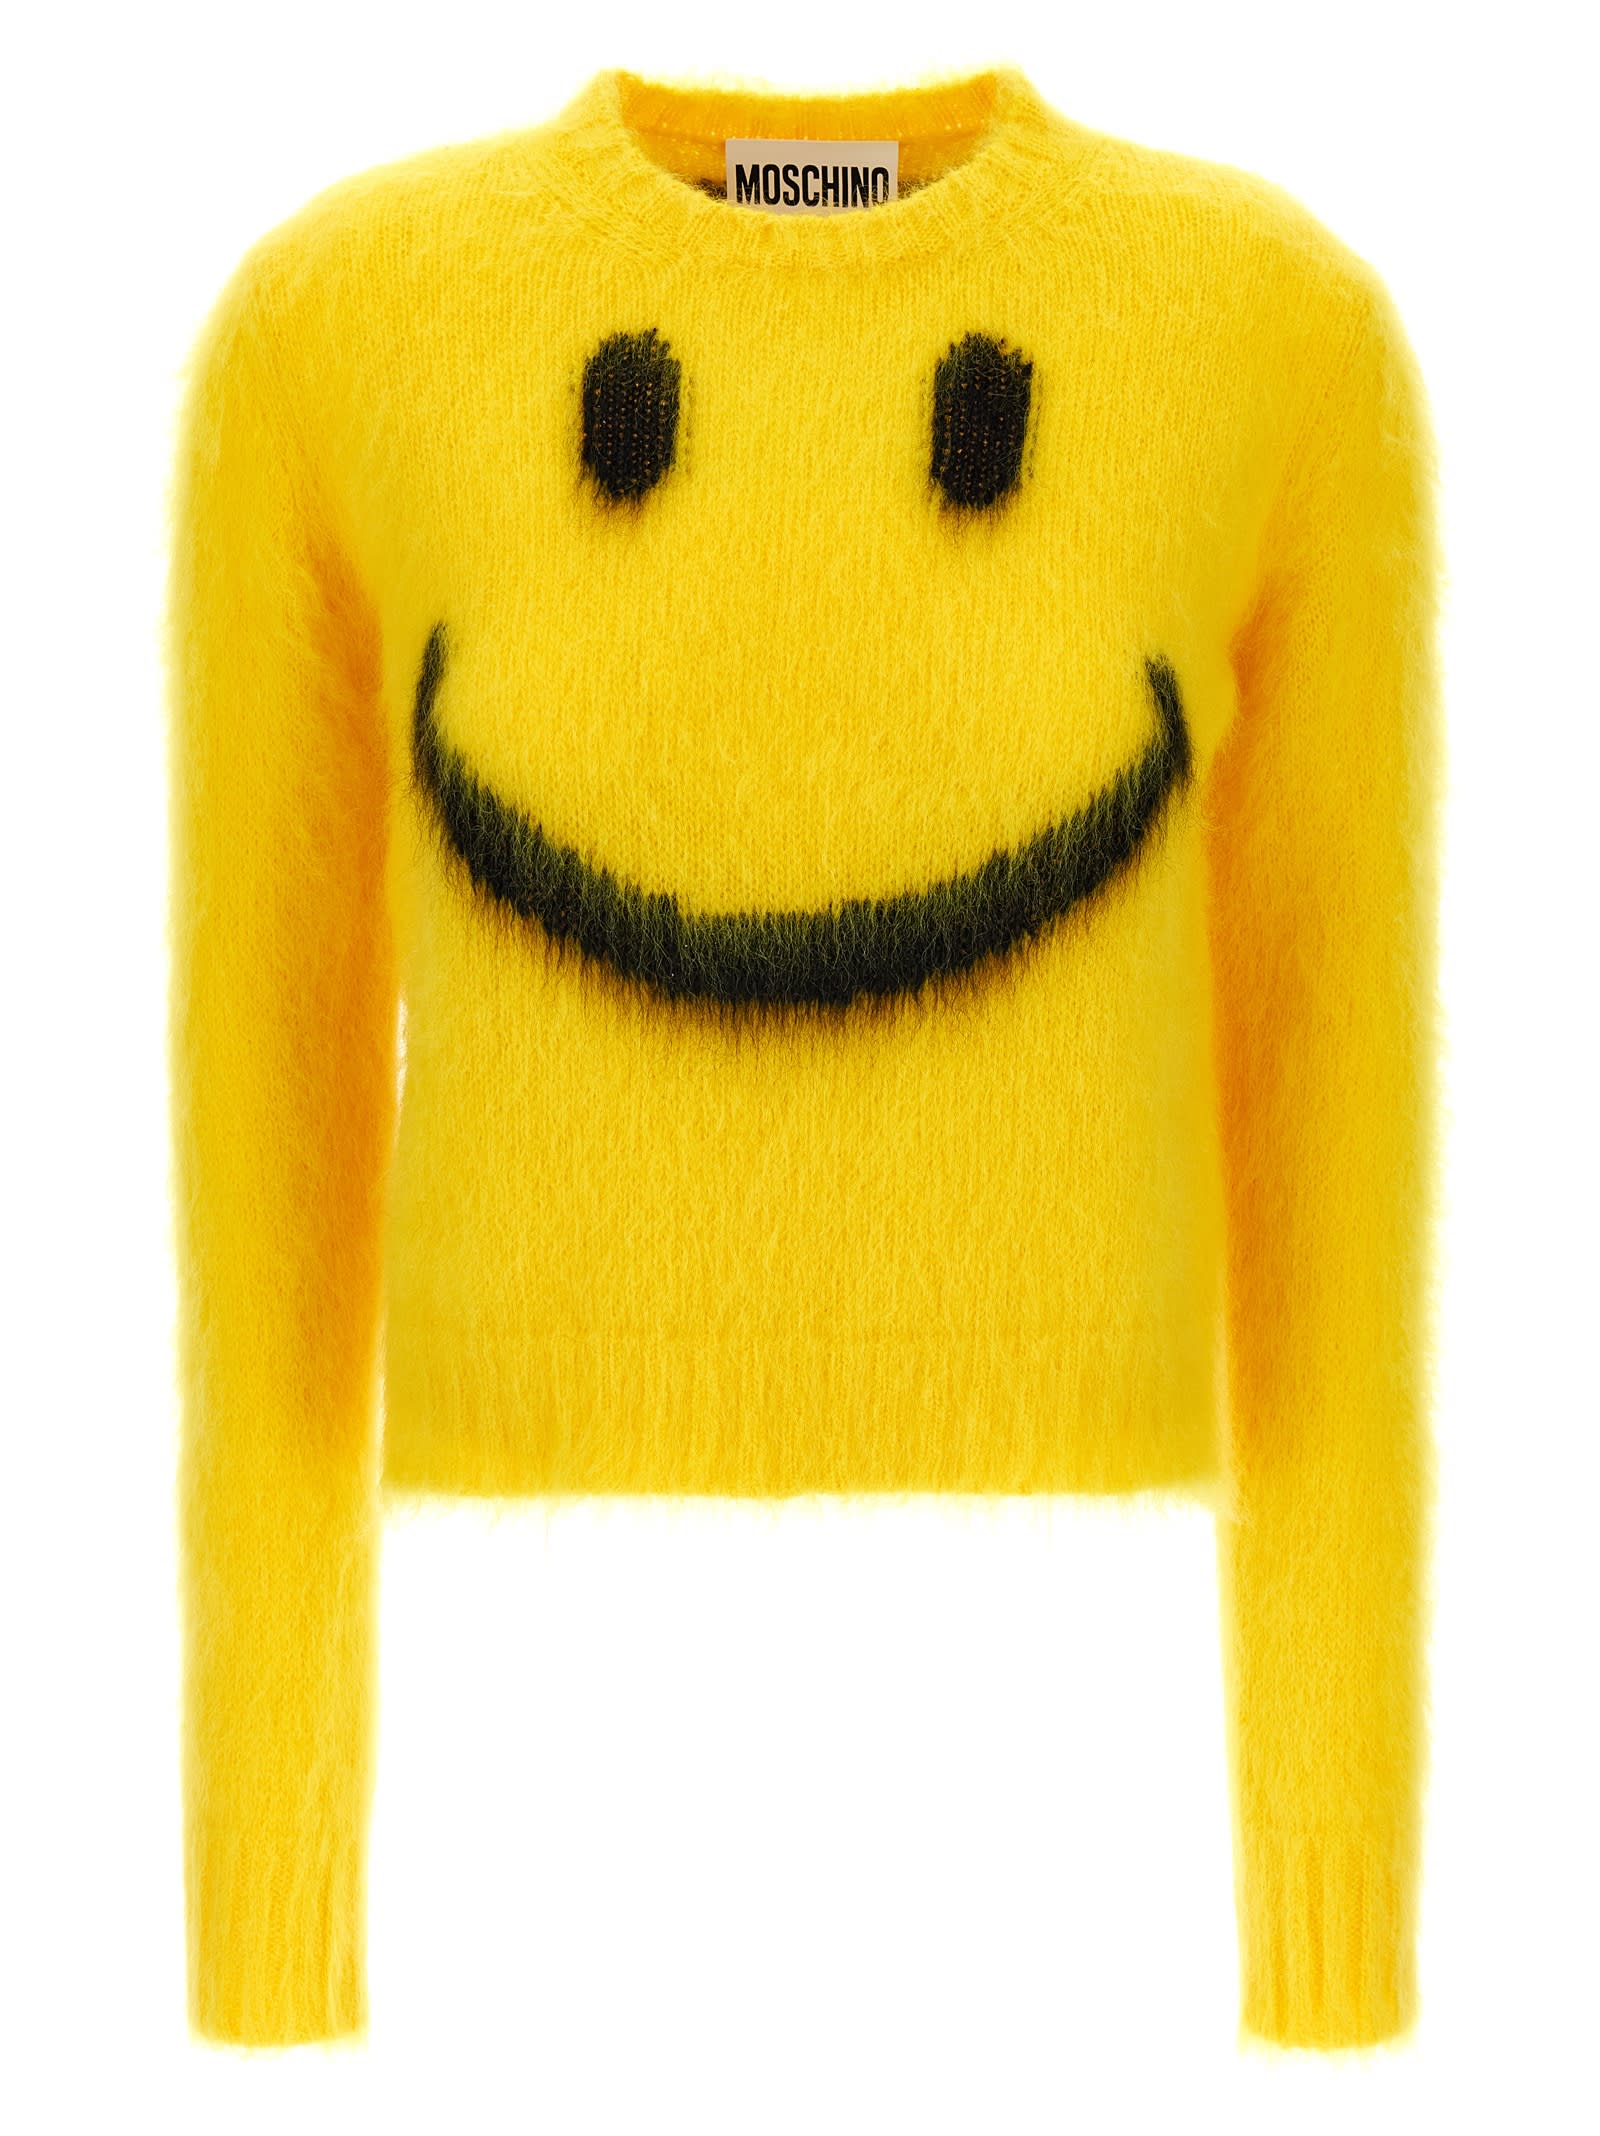 smiley Sweater